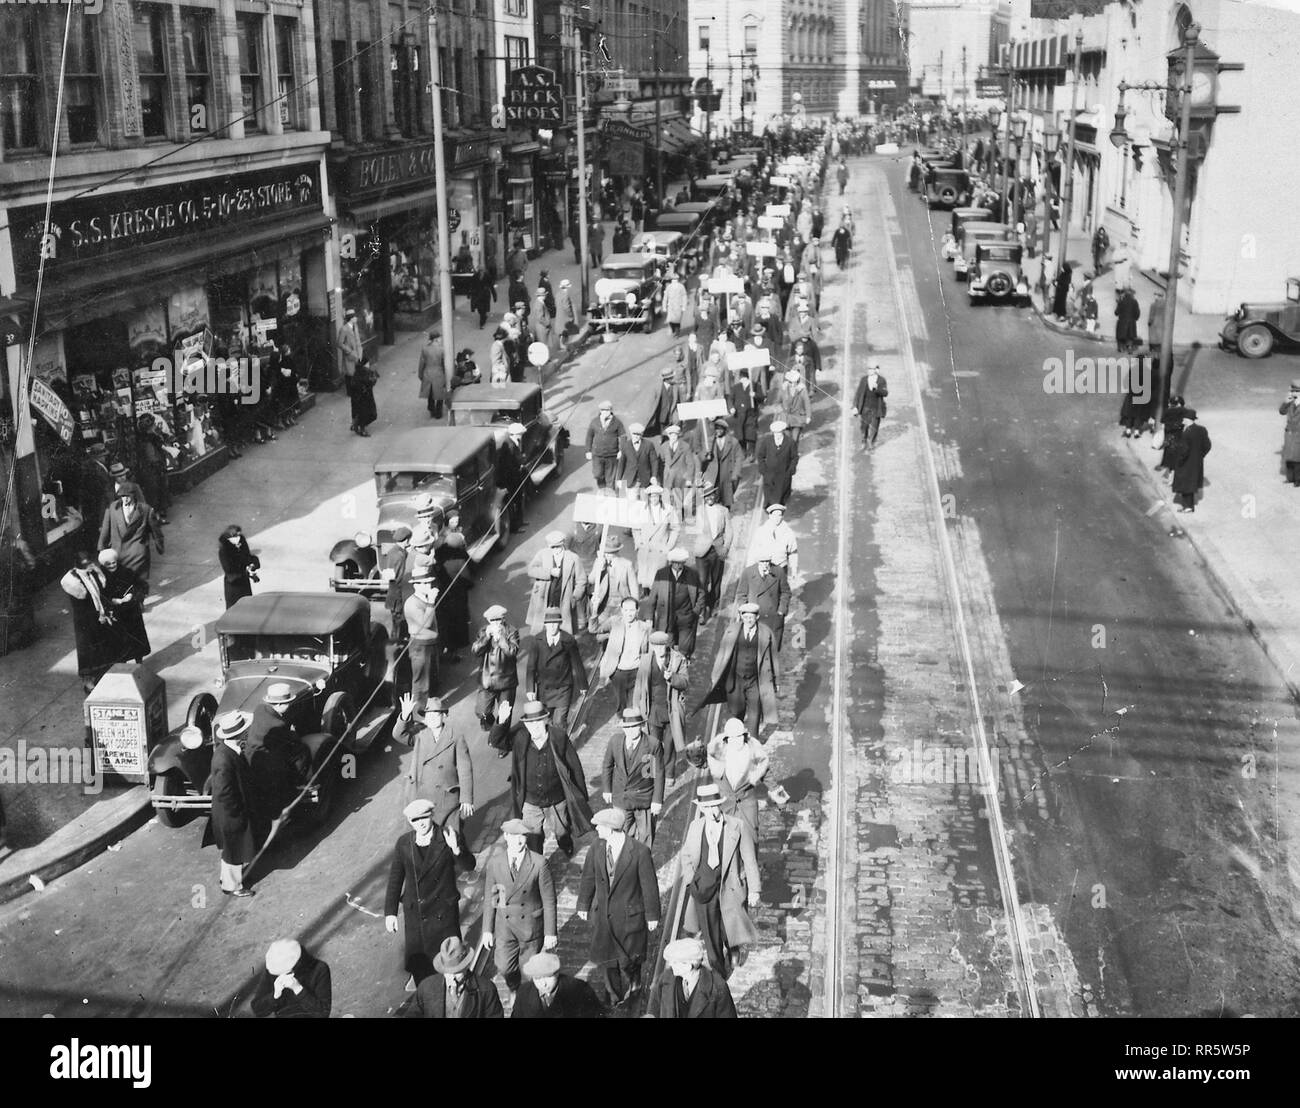 Depression - Unemployed - the Unemployed Union: marchers south on Broadway: Camden New Jersey typical scene reflecting large population of unemployed in desperate need of work and looking for jobs. 1935 Stock Photo